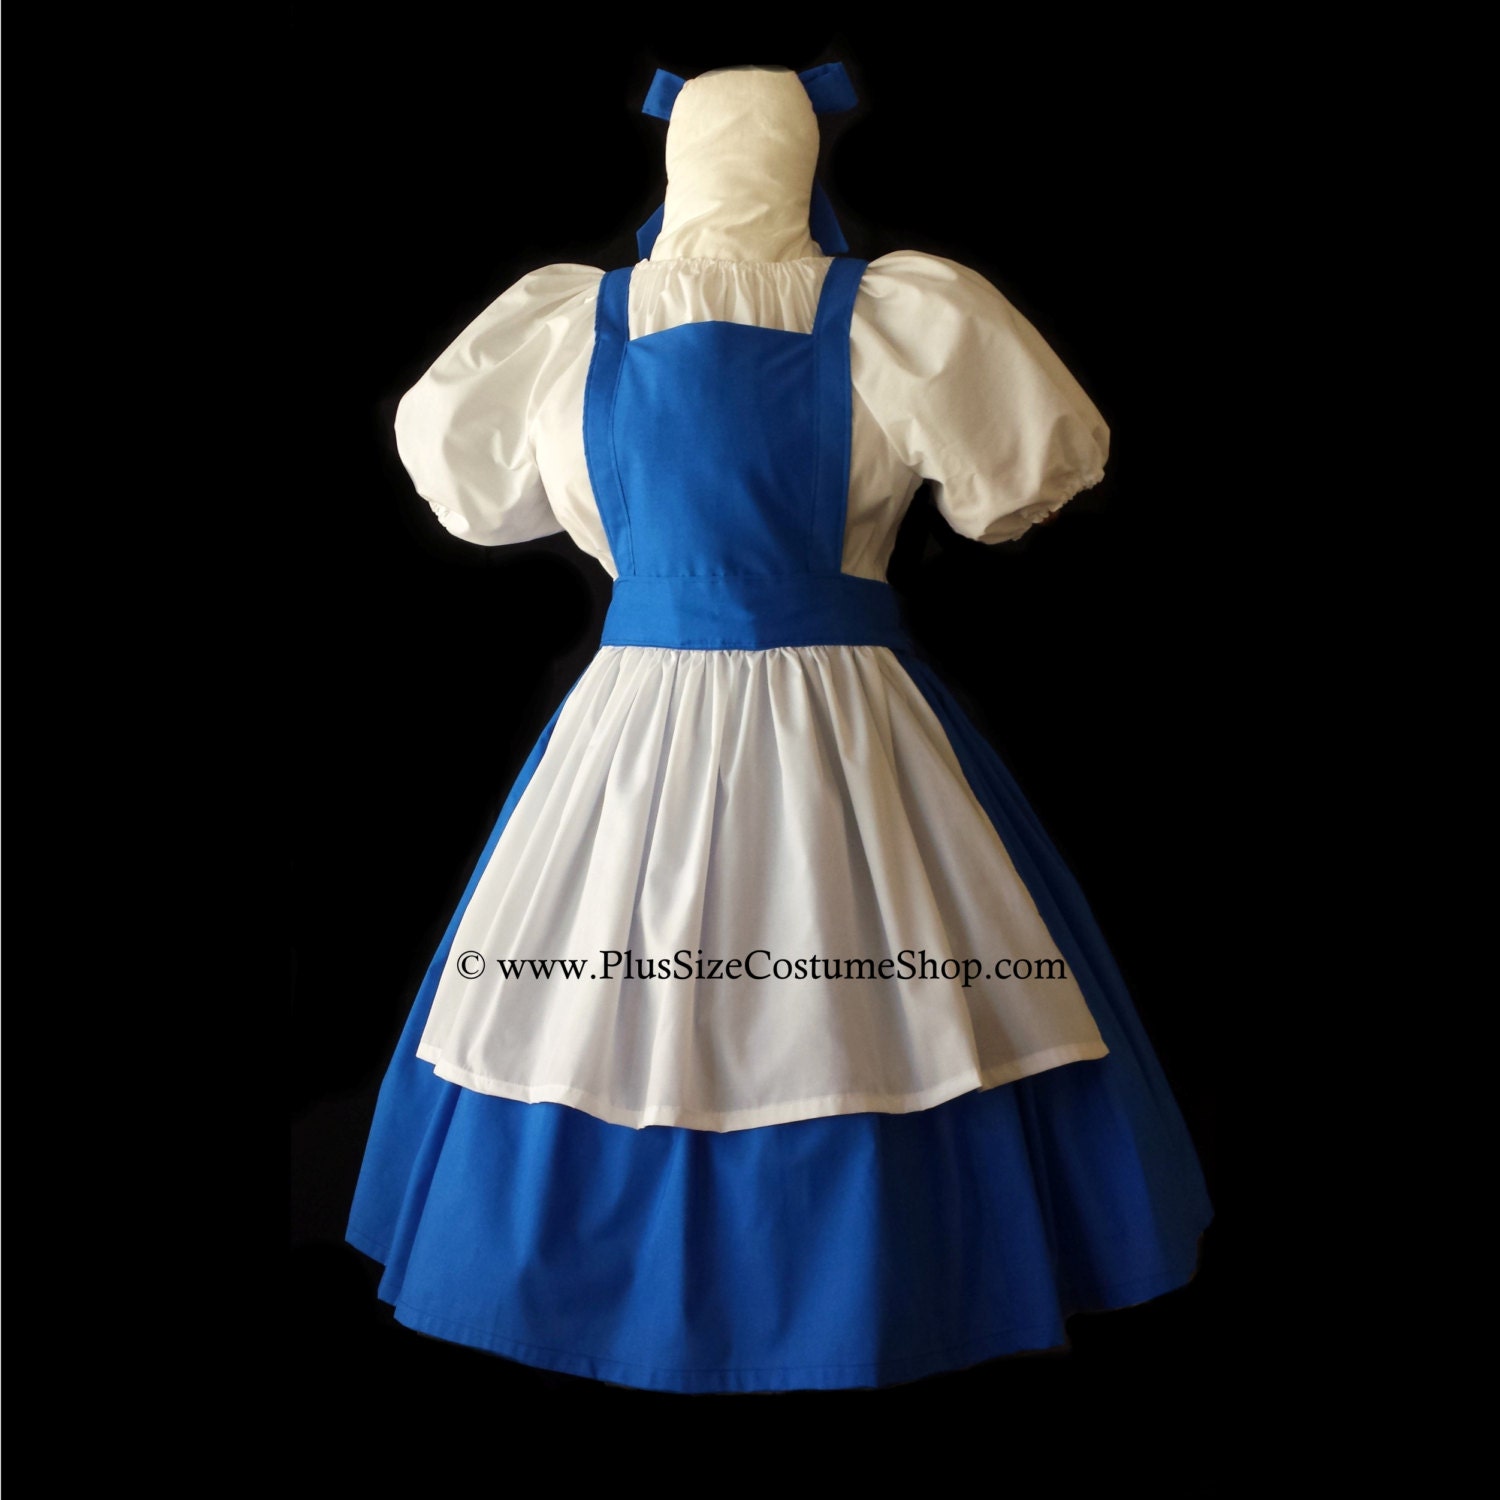 BELLE Blue Dress Plus Size Halloween Costume BEAUTY and the